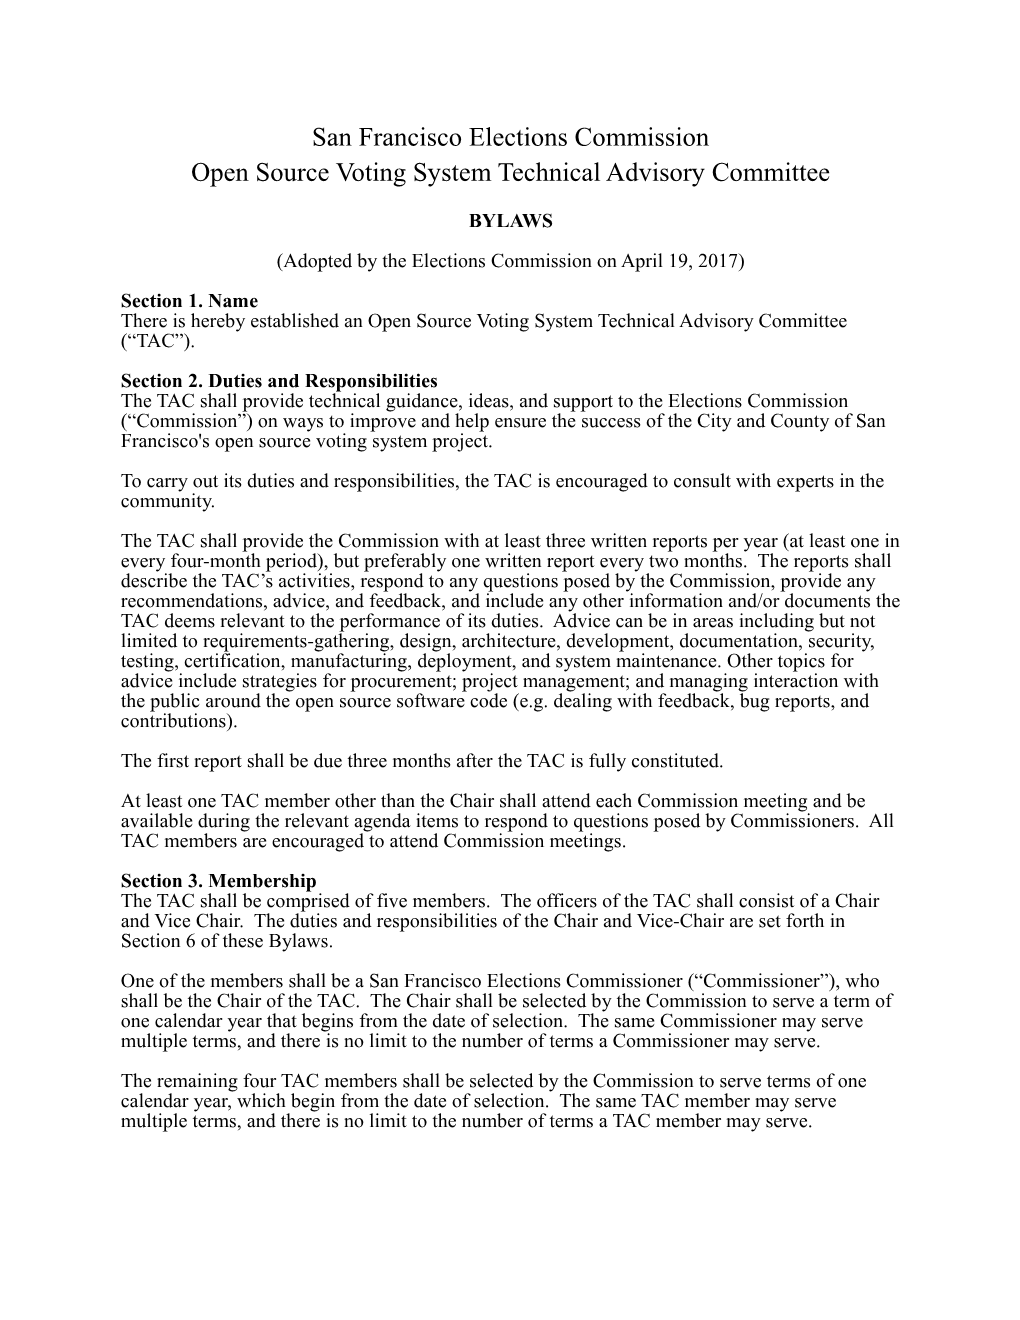 Open Source Voting System Technical Advisory Committee